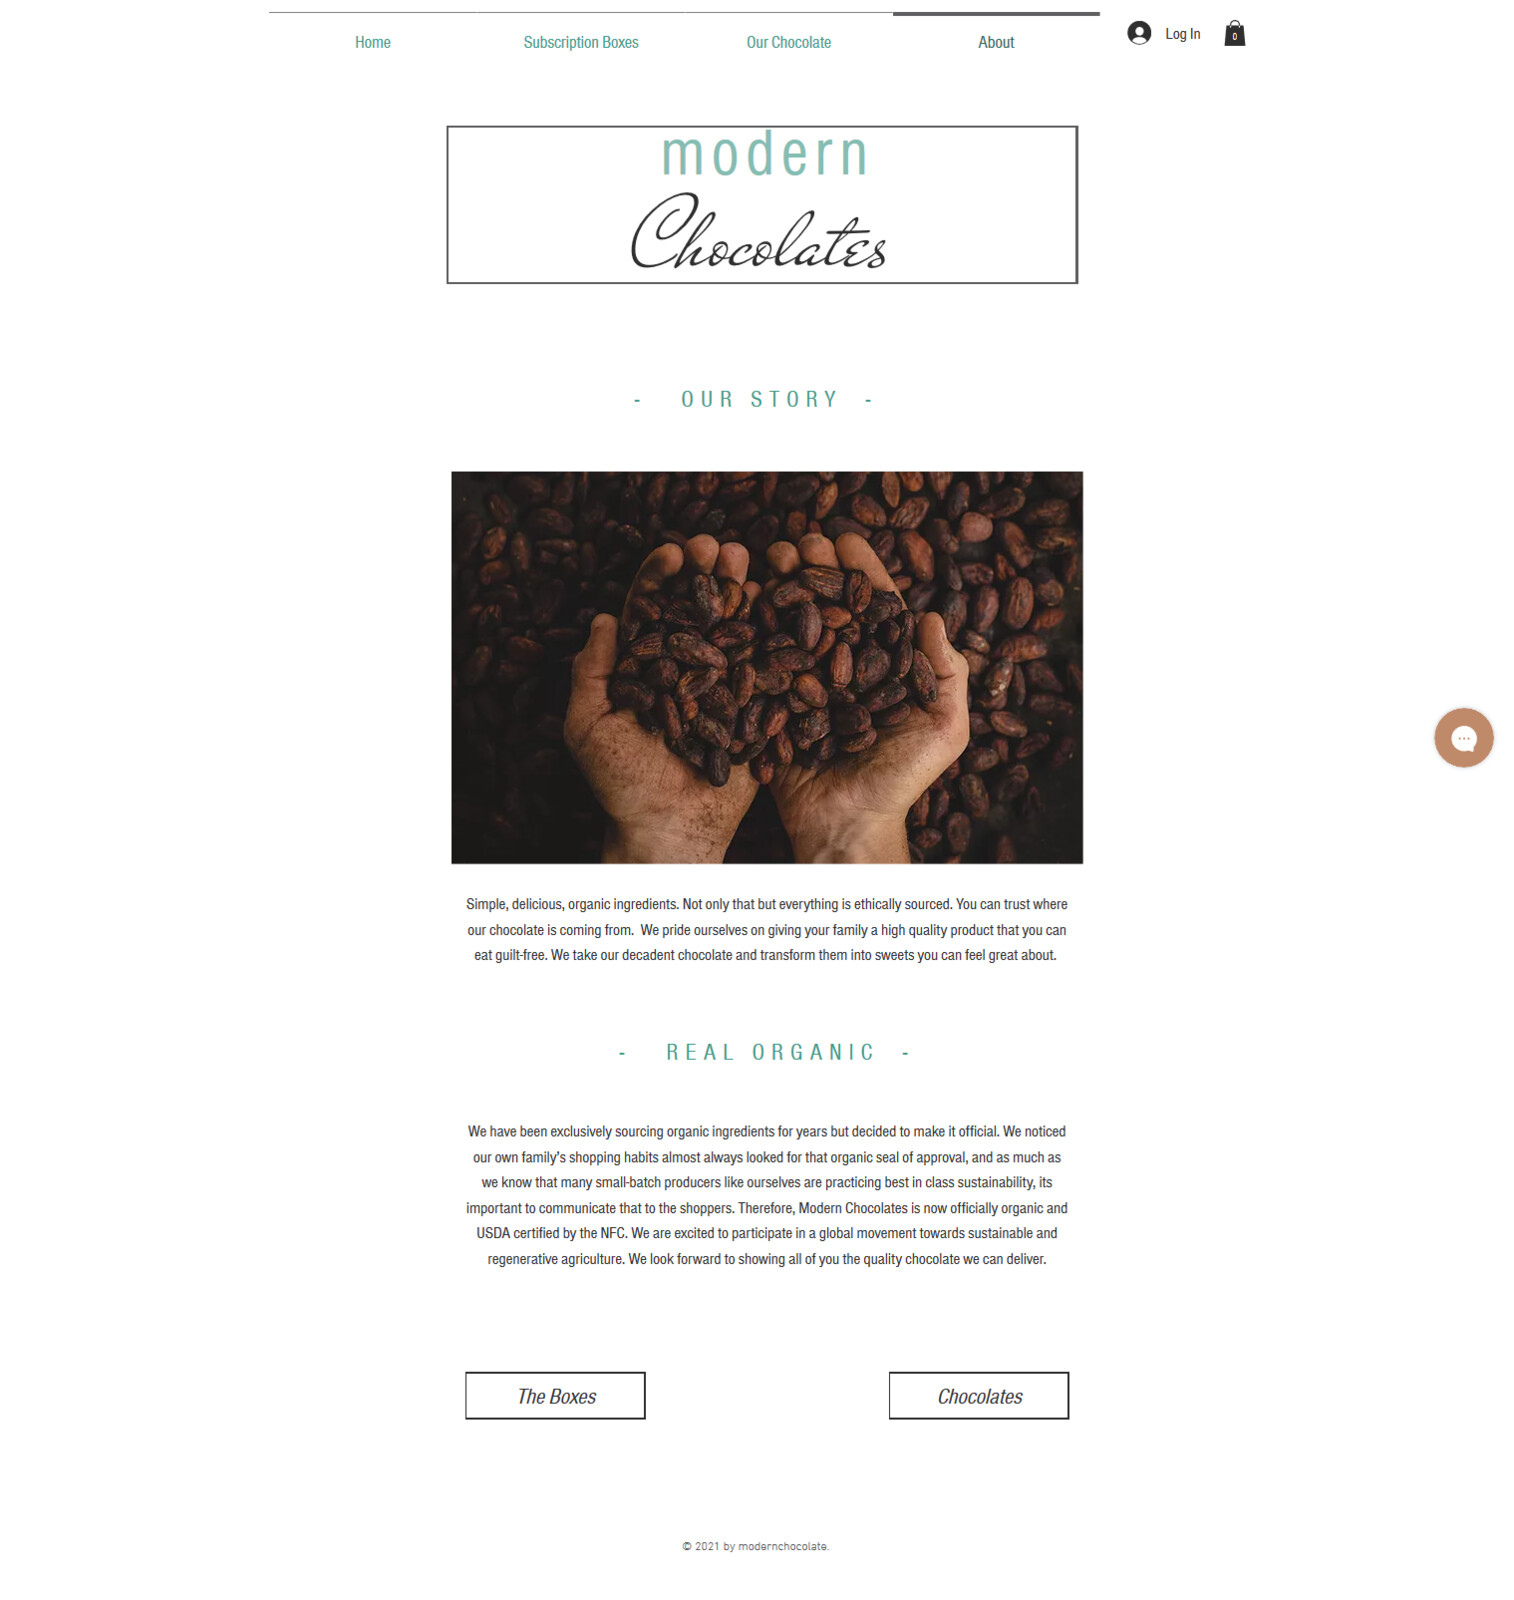 The "About" page for Modern Chocolates website

Photo Credit:
Pablo Merchán Montes